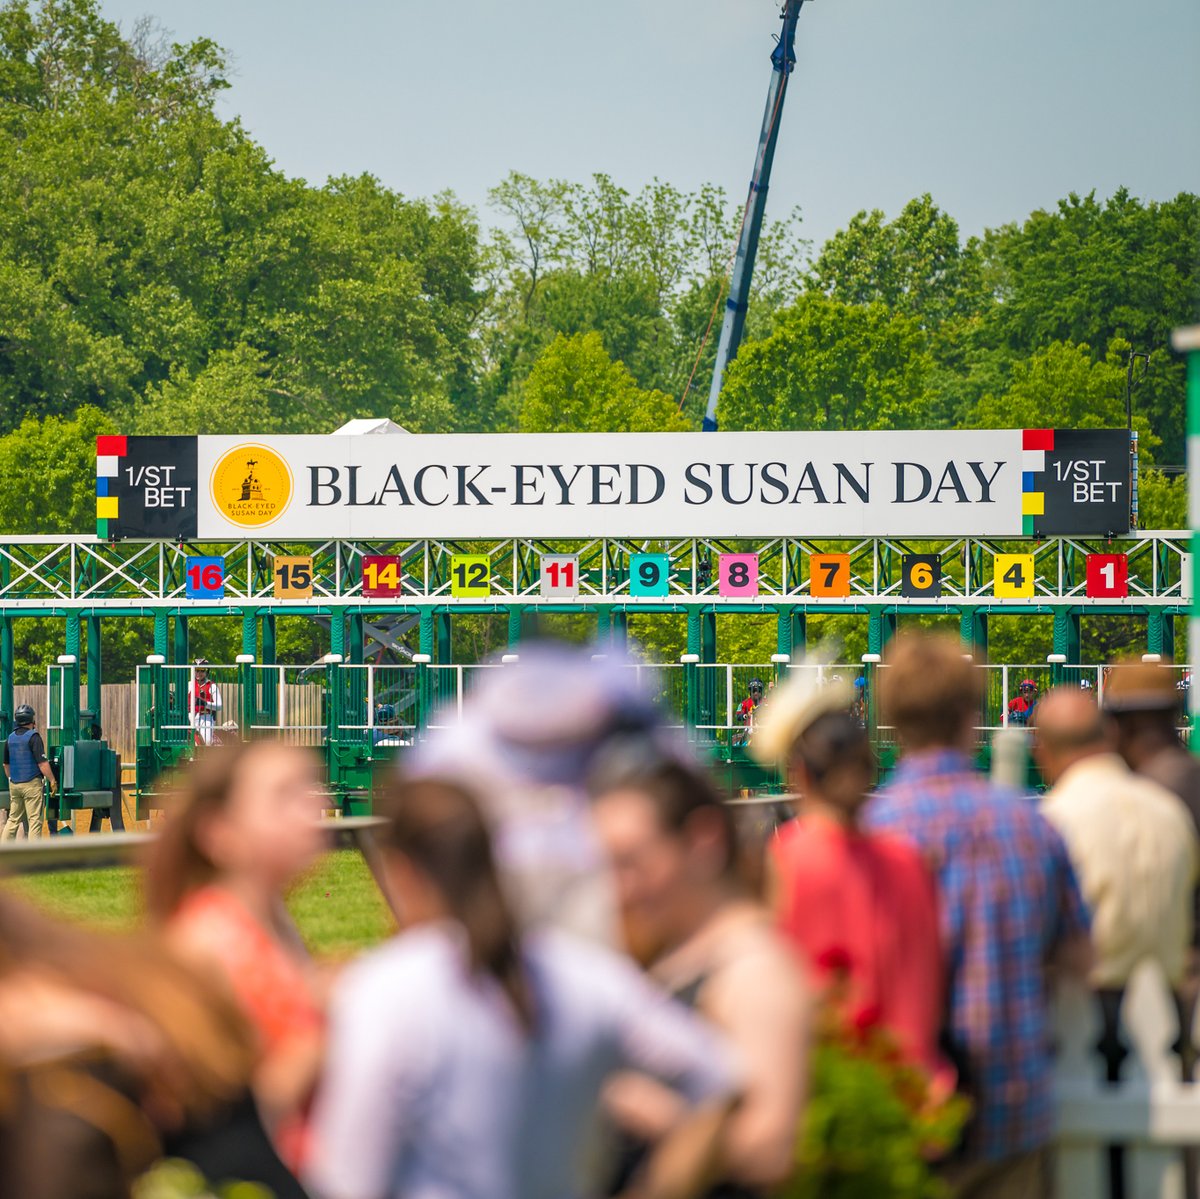 100 years of the fastest fillies. Celebrate the 100th running of the Black-Eyed Susan Stakes on Friday, May 17. Tickets available now. #Preakness149 🏇 Get your tickets before prices go up Wednesday, April 24.